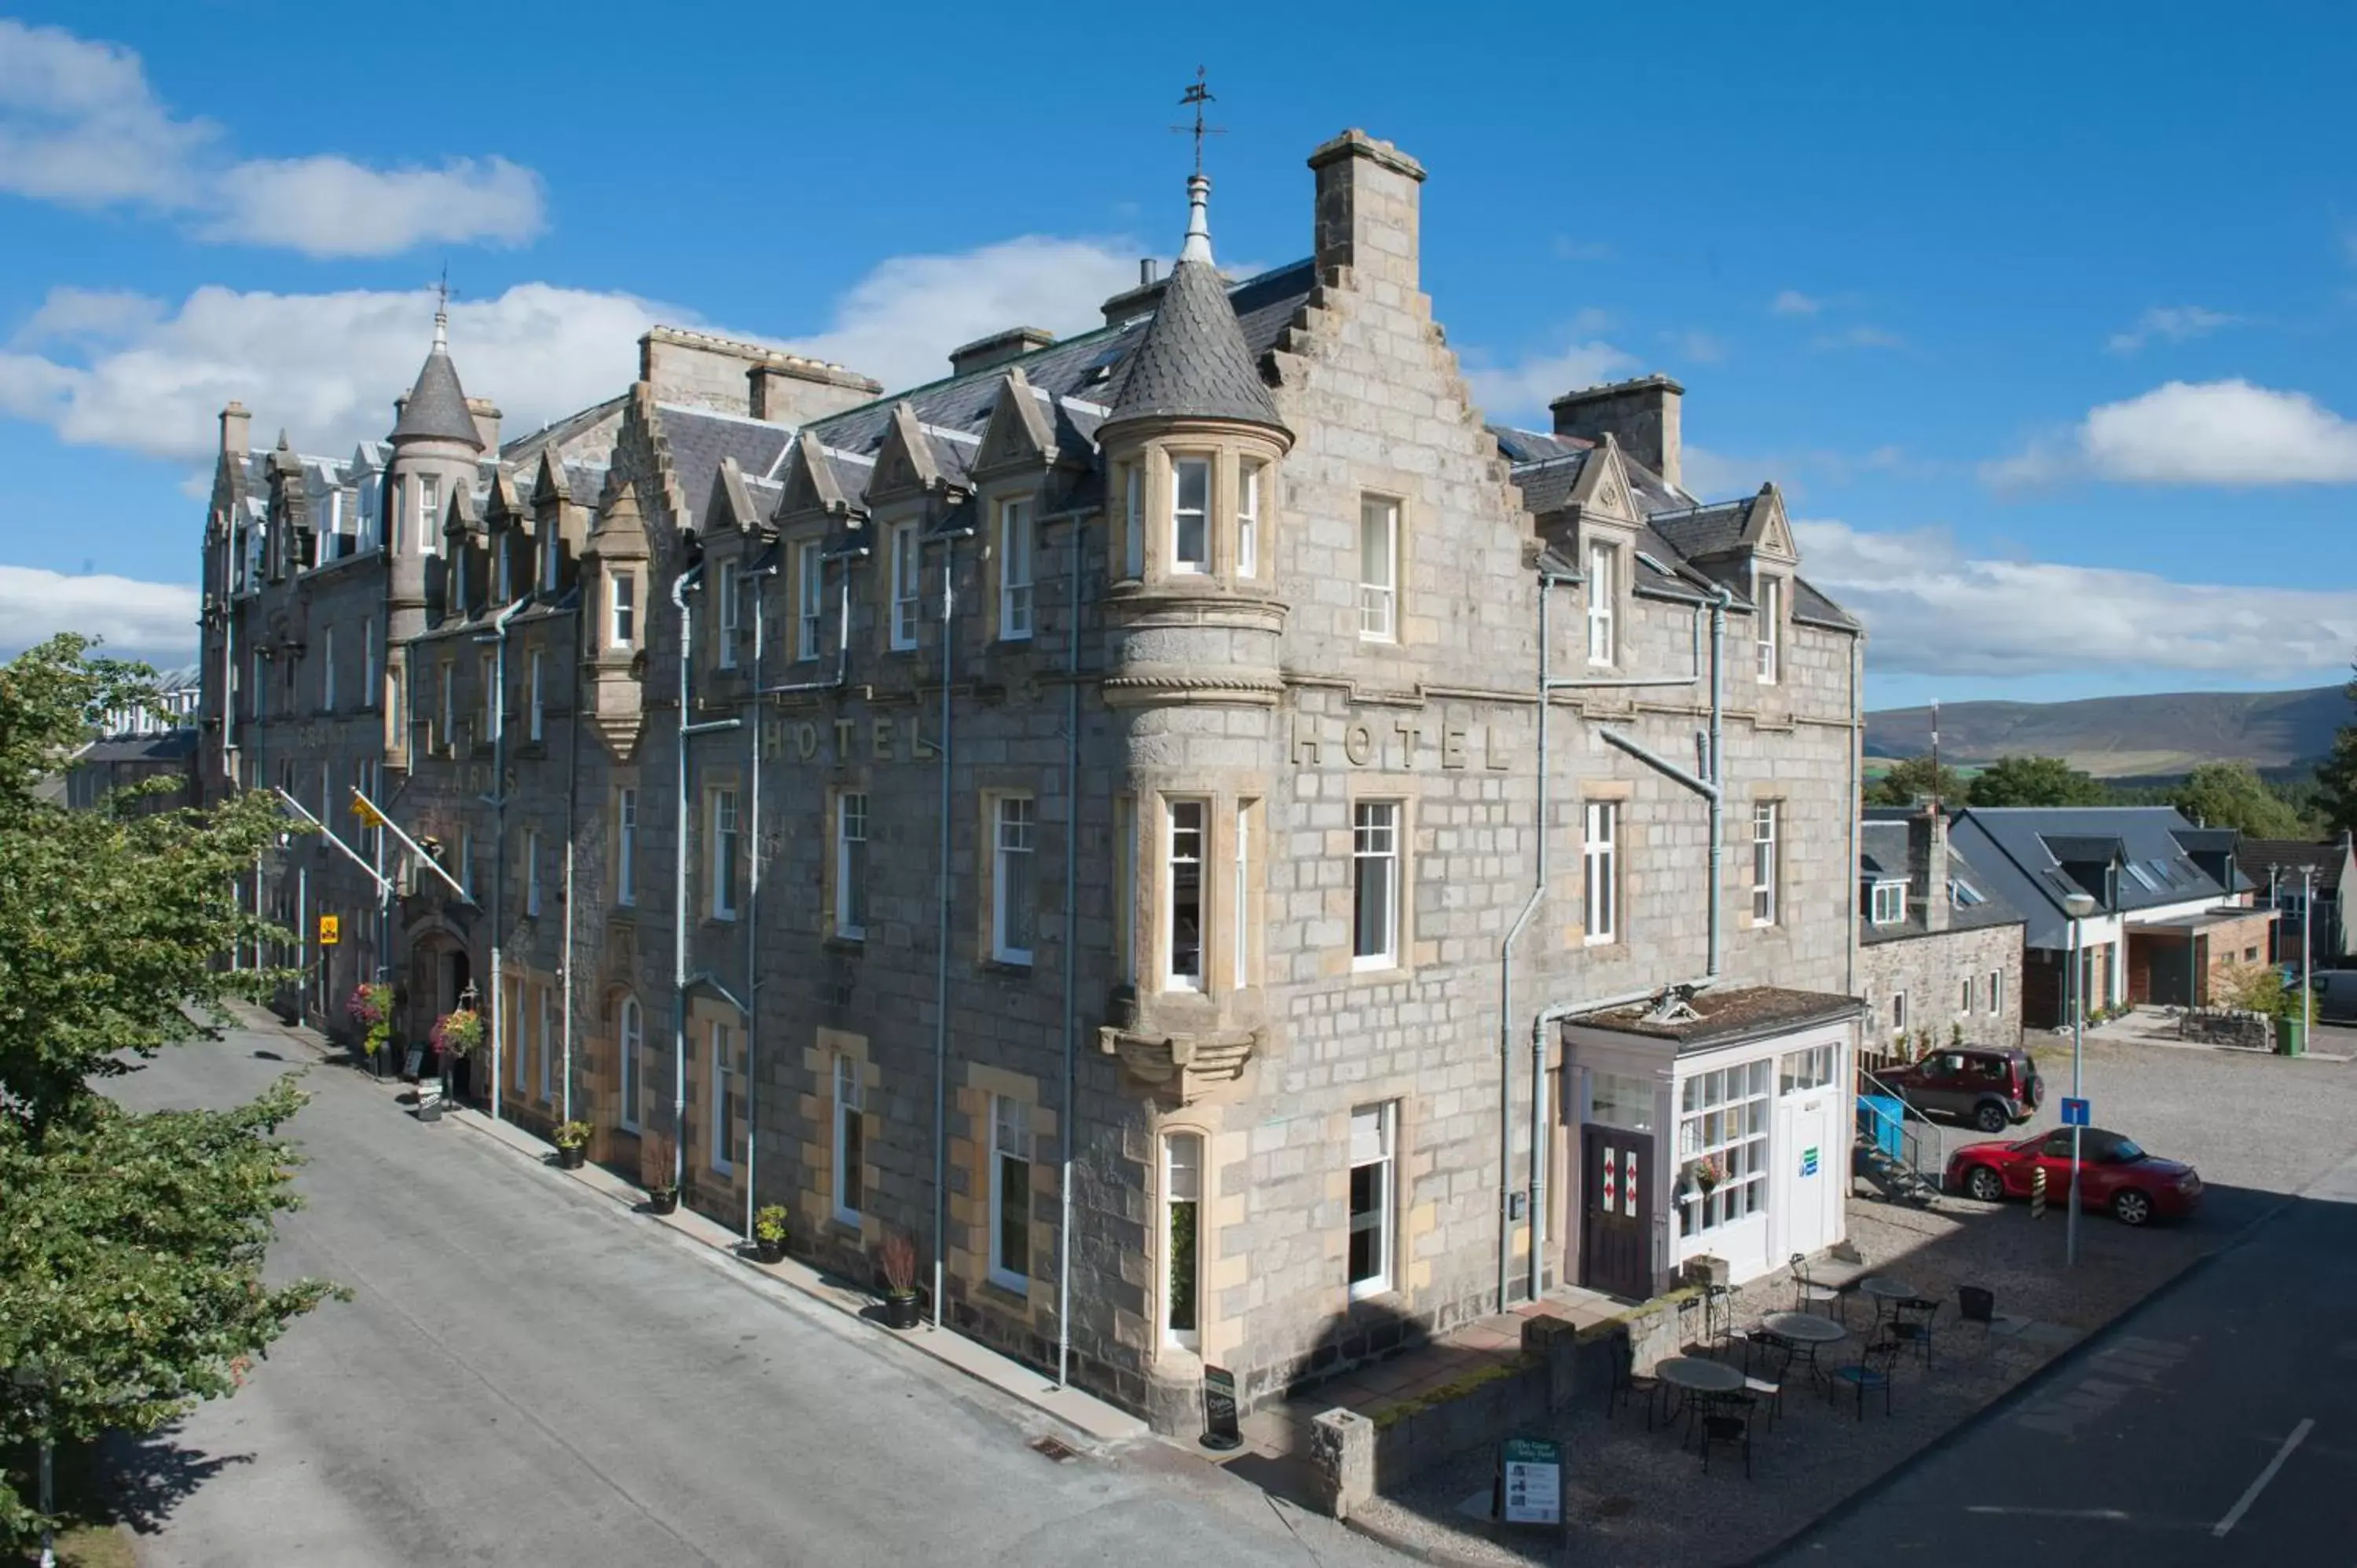 Bird's eye view, Property Building in Grant Arms Hotel